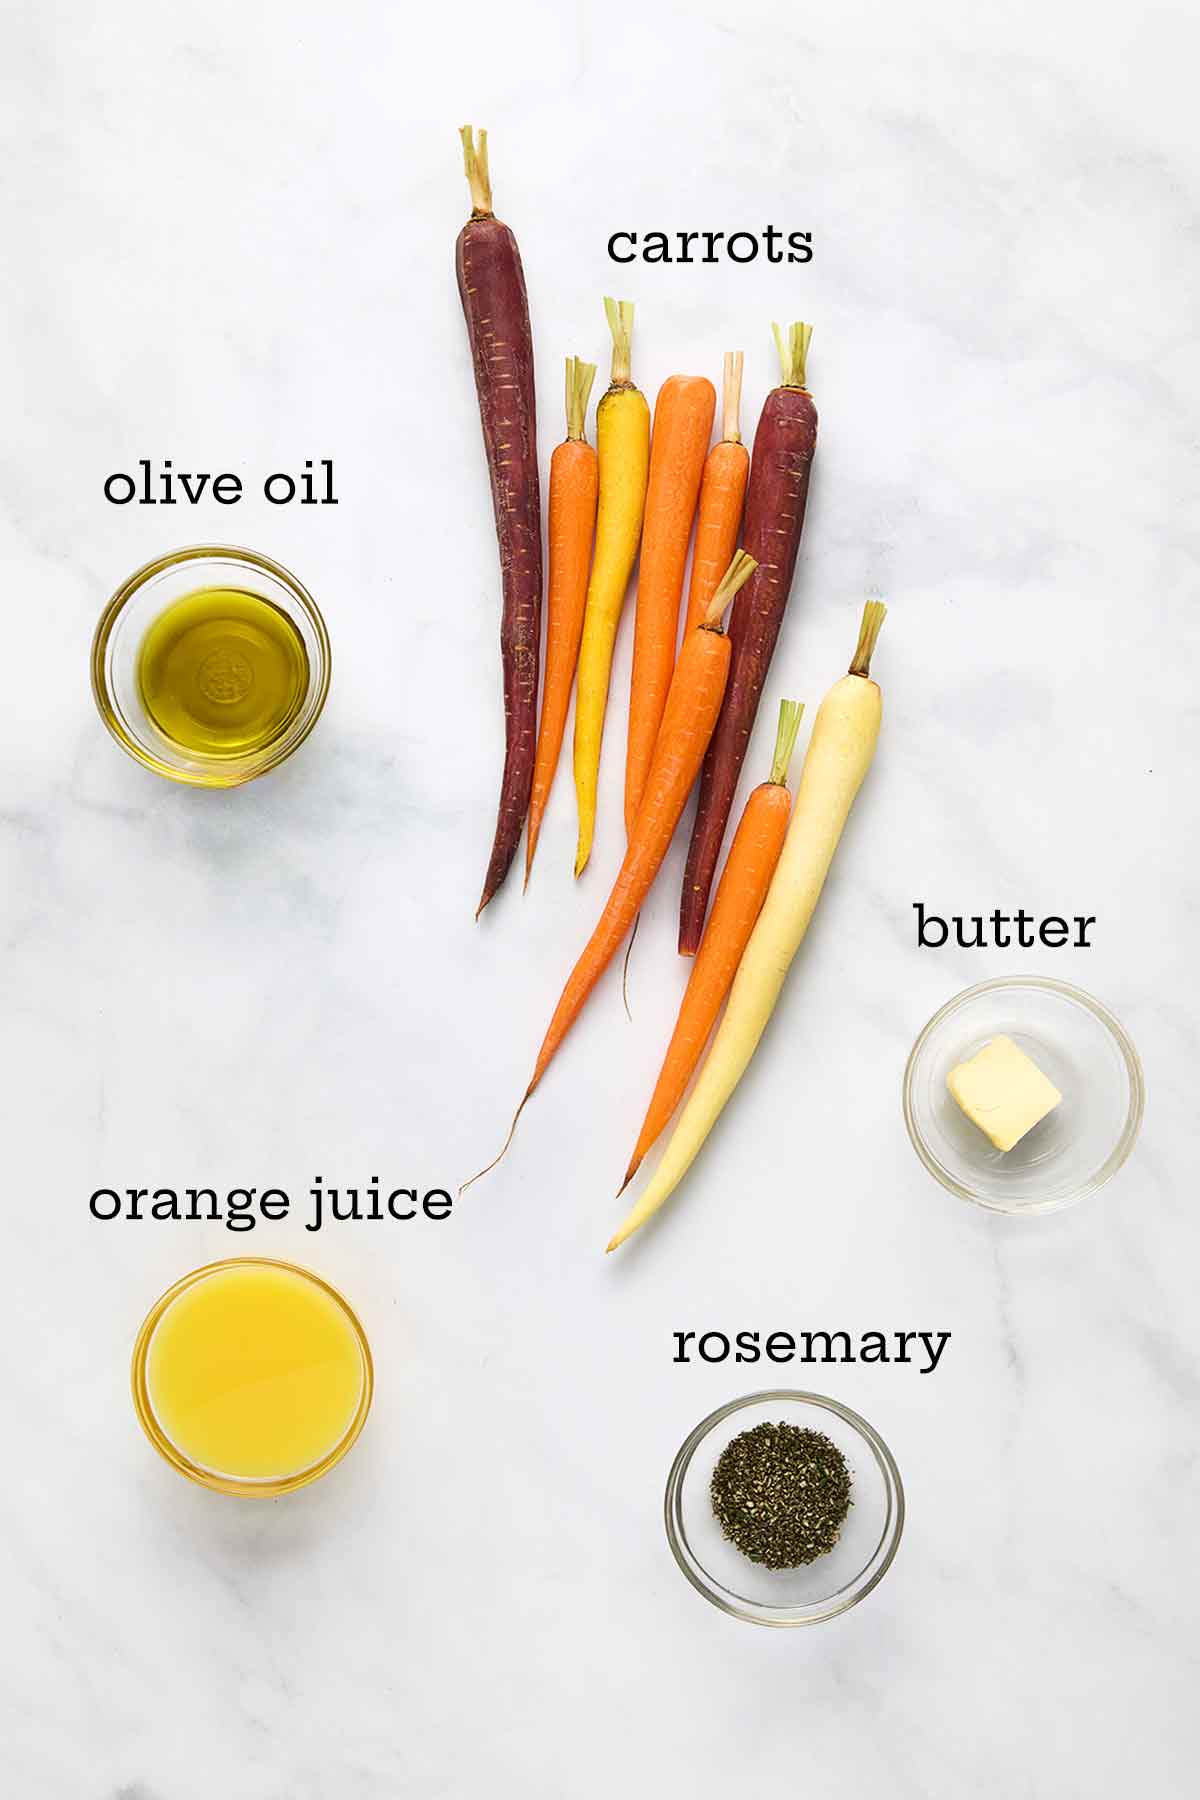 Ingredients for braised carrots--fresh carrots, olive oil, butter, orange juice, and fresh rosemary.